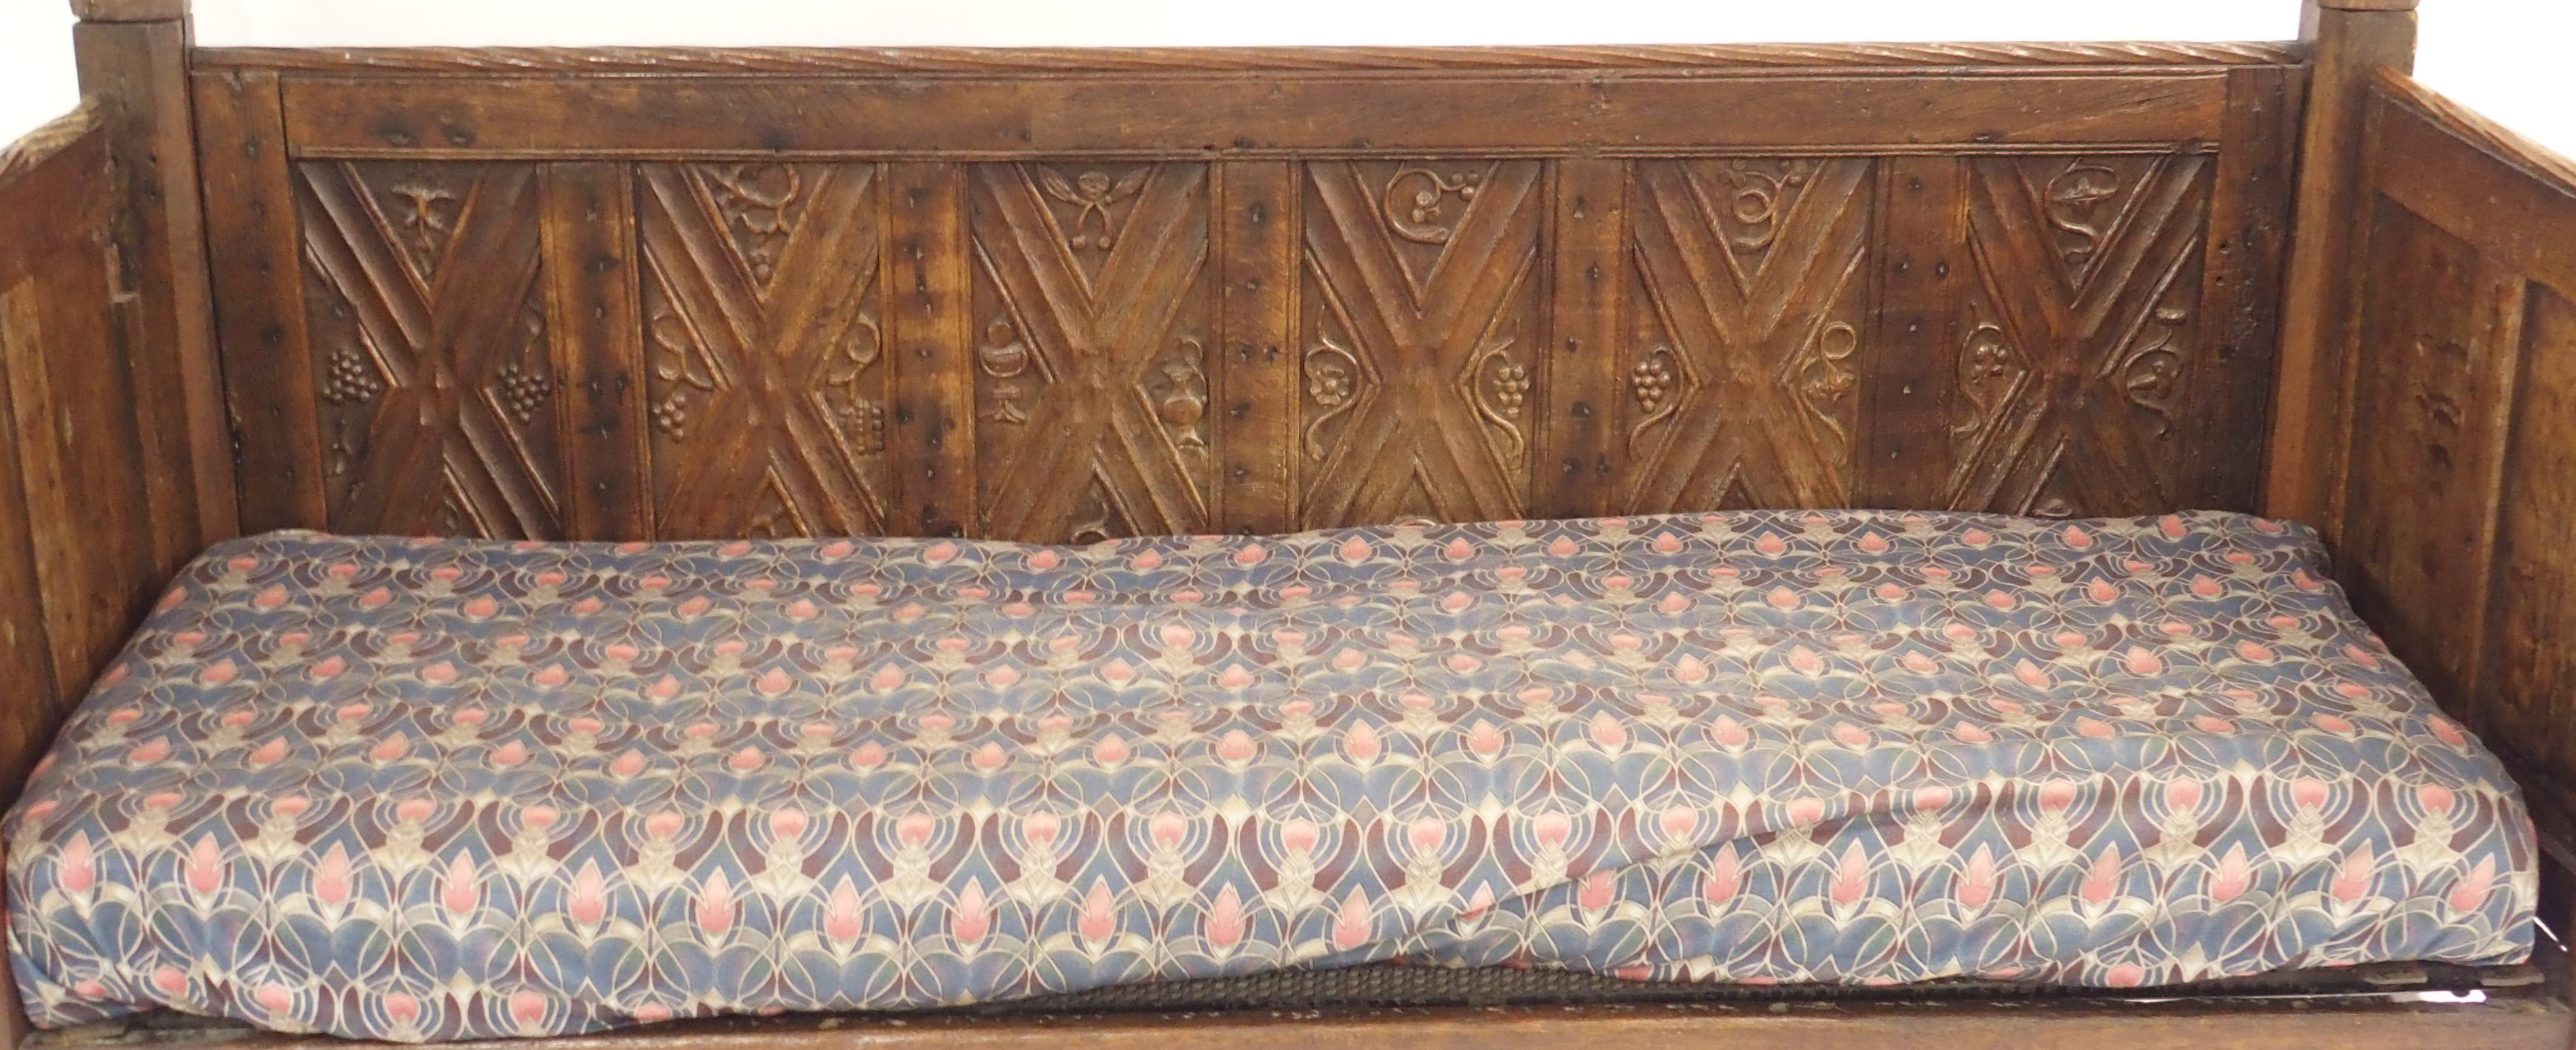 A FRENCH OAK GOTHIC STYLE DAY BED the panels carved with grape vines, chalice,cup and acorns beneath - Image 2 of 14